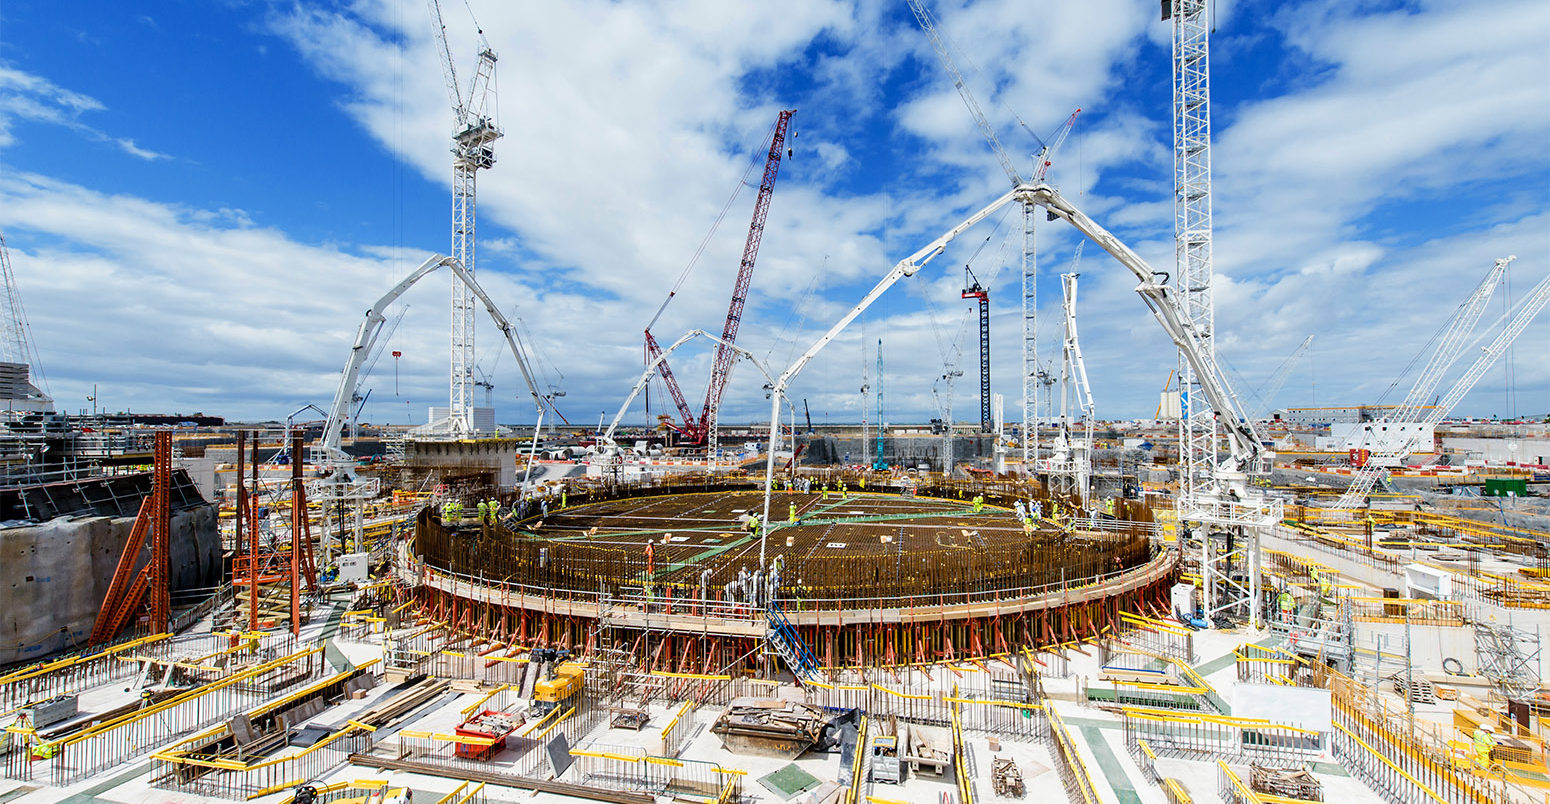 Construction of Hinkley Point C’s first reactor commences, June 2019. Credit: EDF.